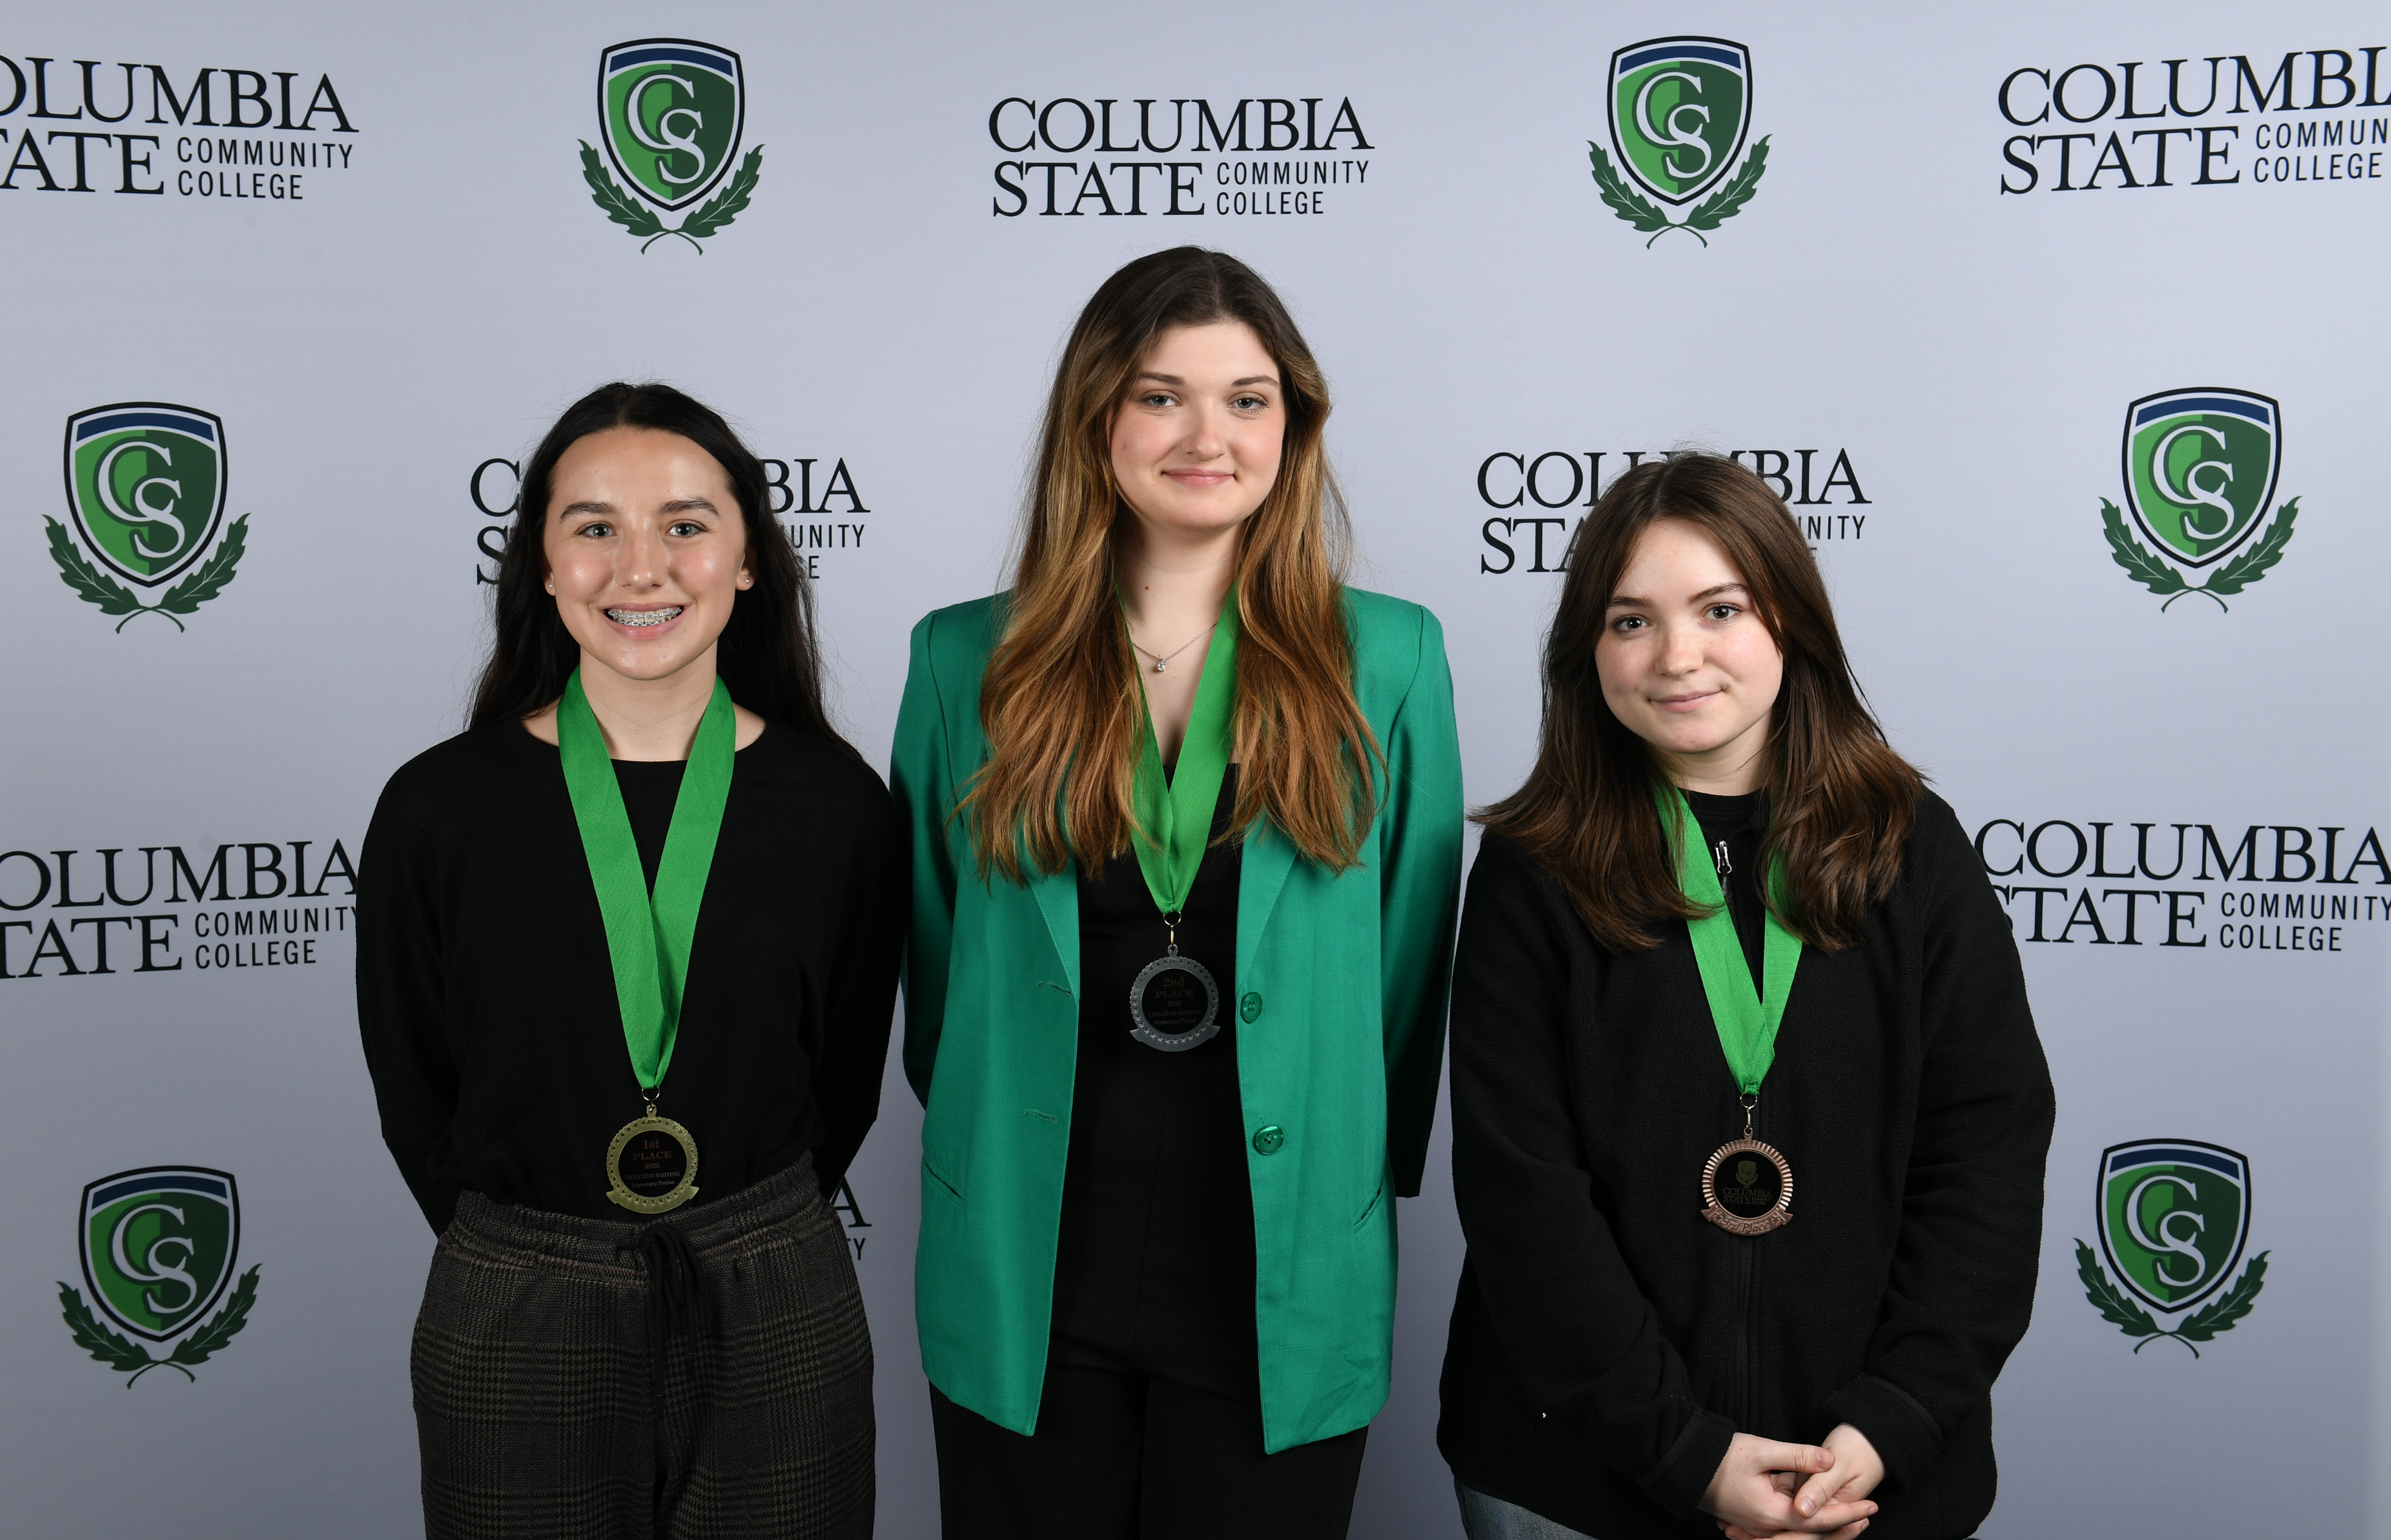 Creative Writing – Impromptu Fiction Winners (left to right): First place winner, Kenslee Pennington of Loretto High School; second place winner, Sydney L. Stepp of Loretto High School; and third place winner, Megan Freeman of Summit High School.